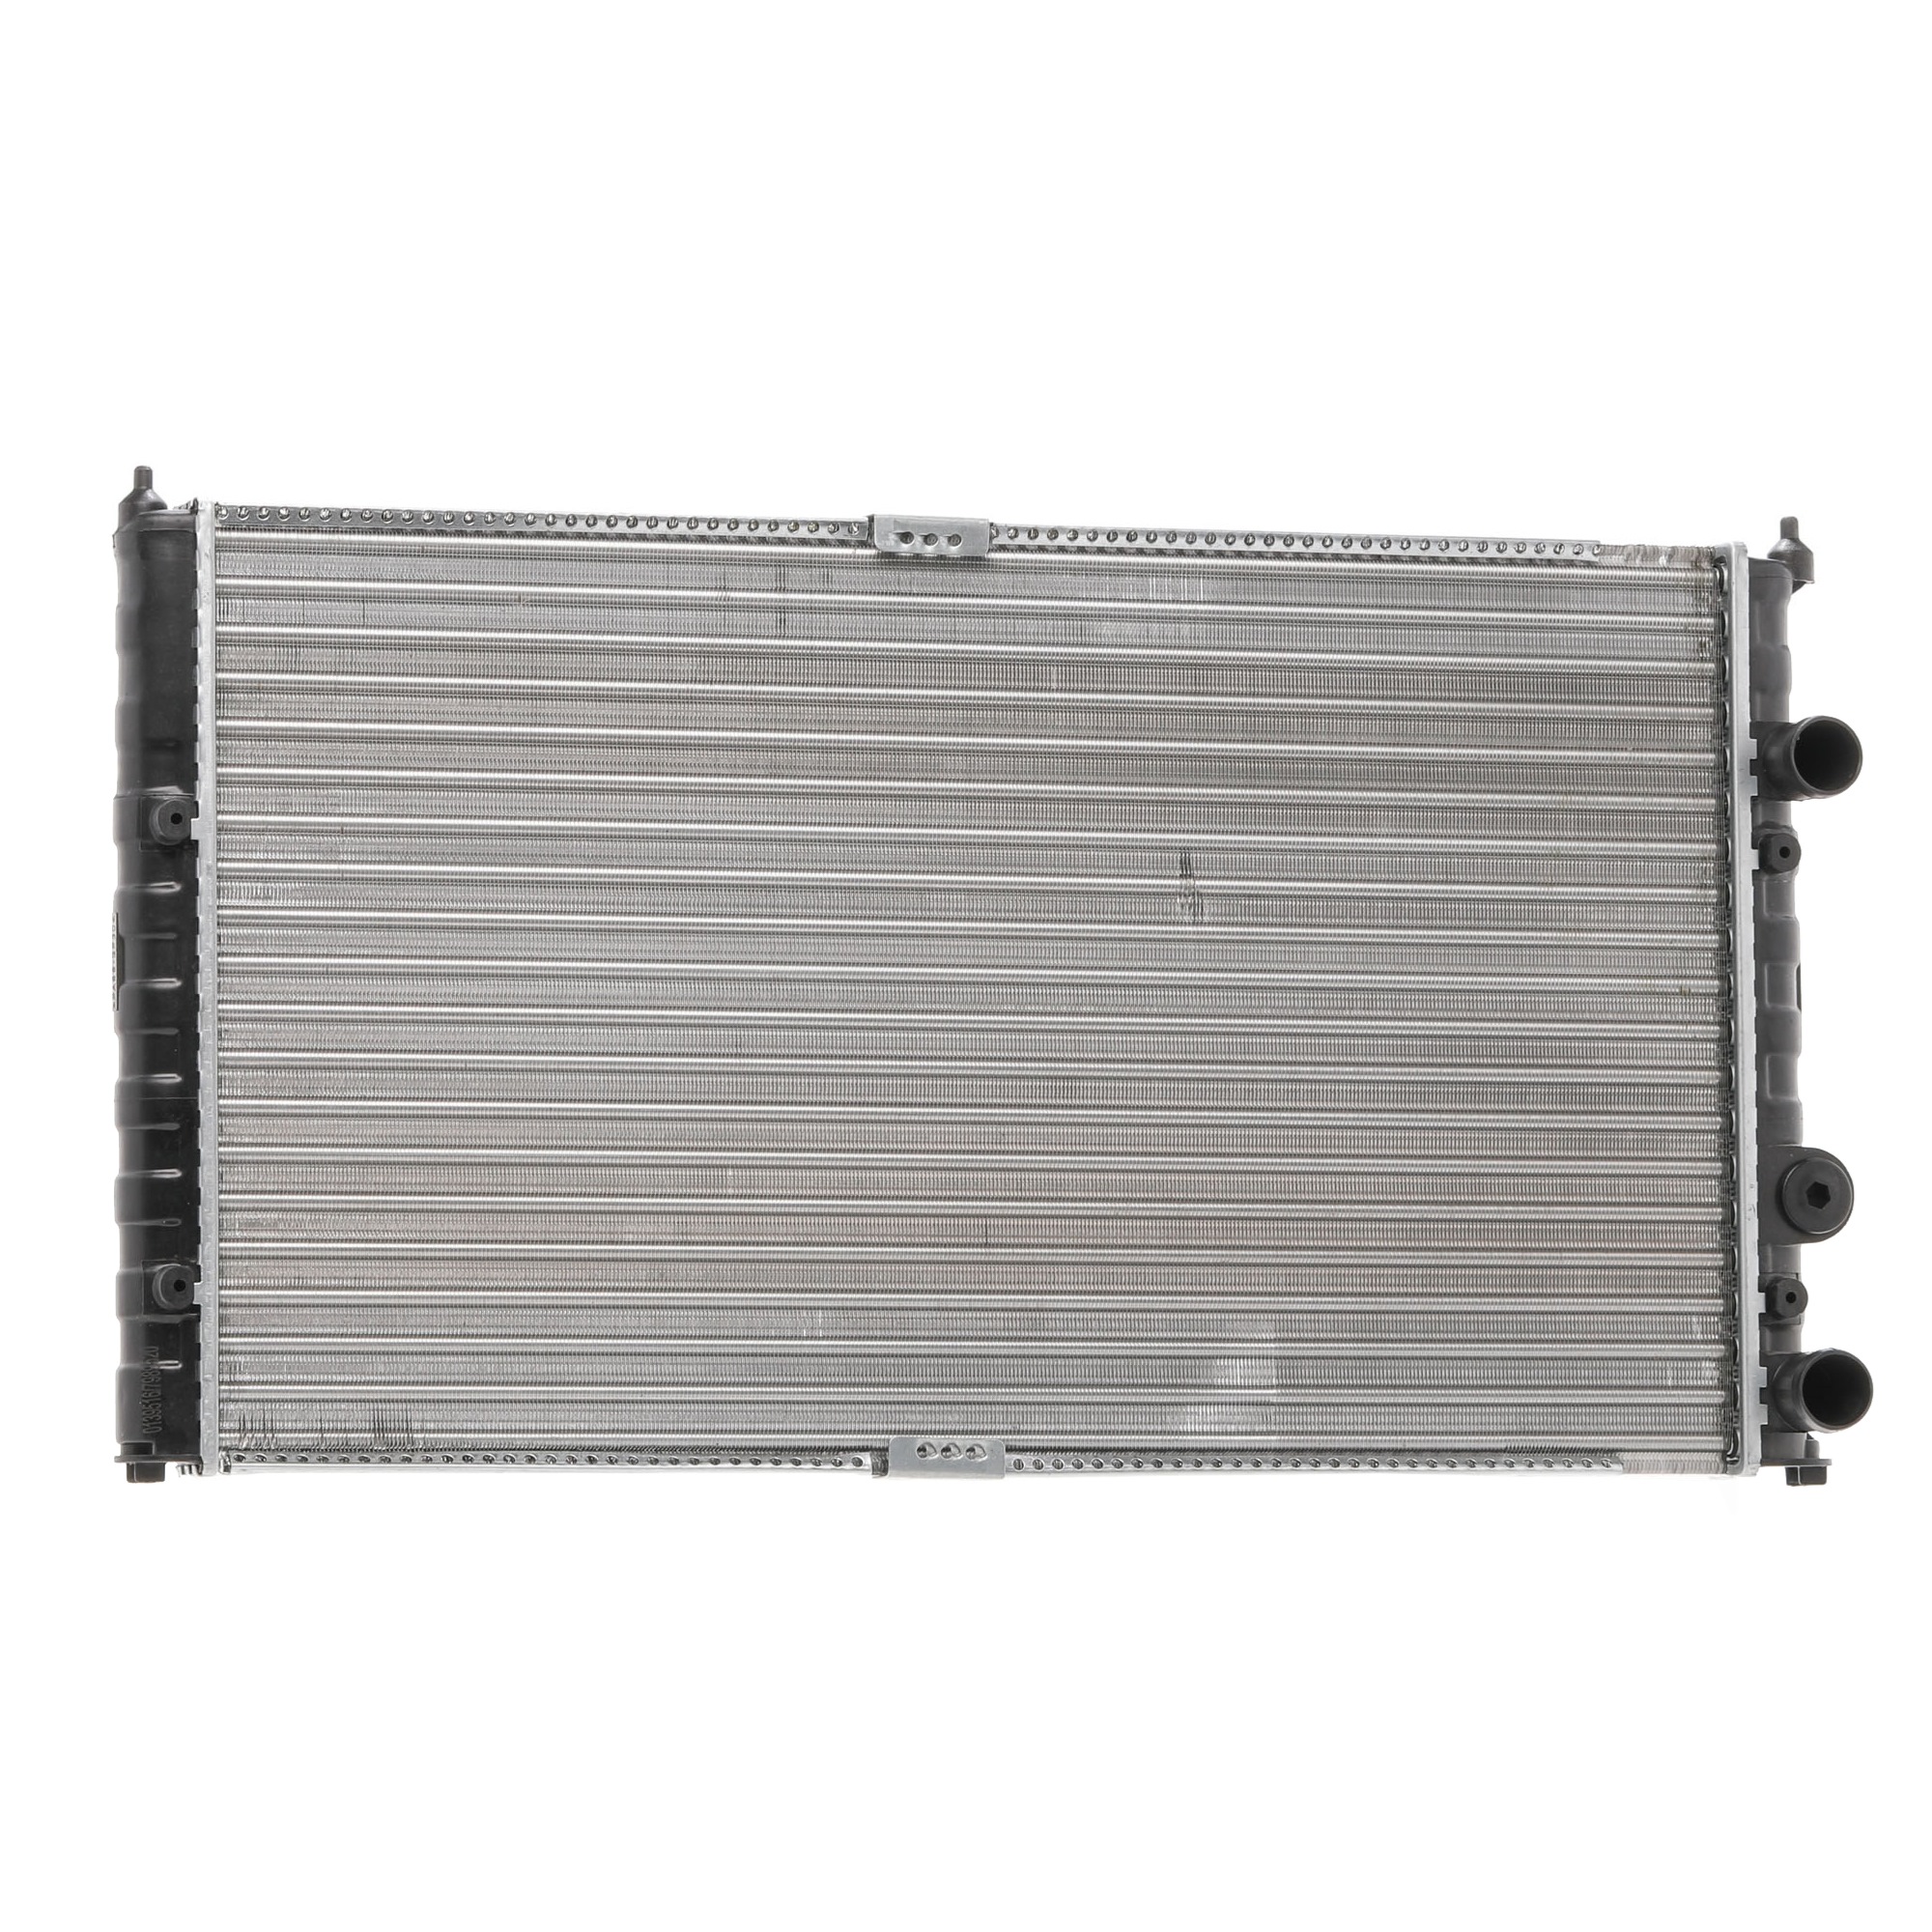 STARK SKRD-0120377 Engine radiator Aluminium, Plastic, for vehicles with/without air conditioning, Manual Transmission